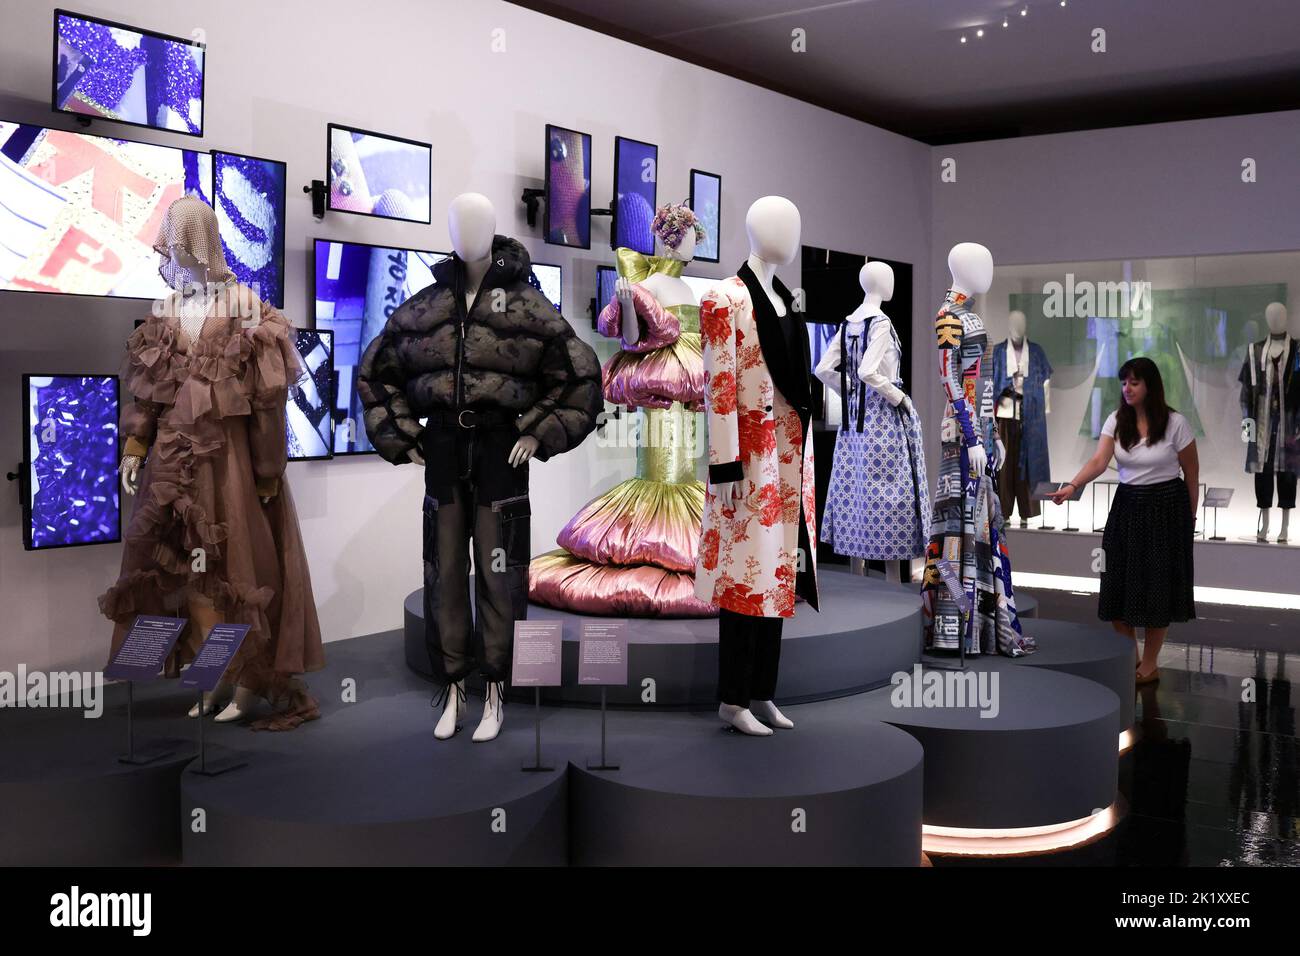 A gallery assistant looks at 'Making K-beauty and fashion' during a press view of 'Hallyu! The Korean Wave' exhibition at the V&A in London, Britain, September 21, 2022. REUTERS/Tom Nicholson Stock Photo